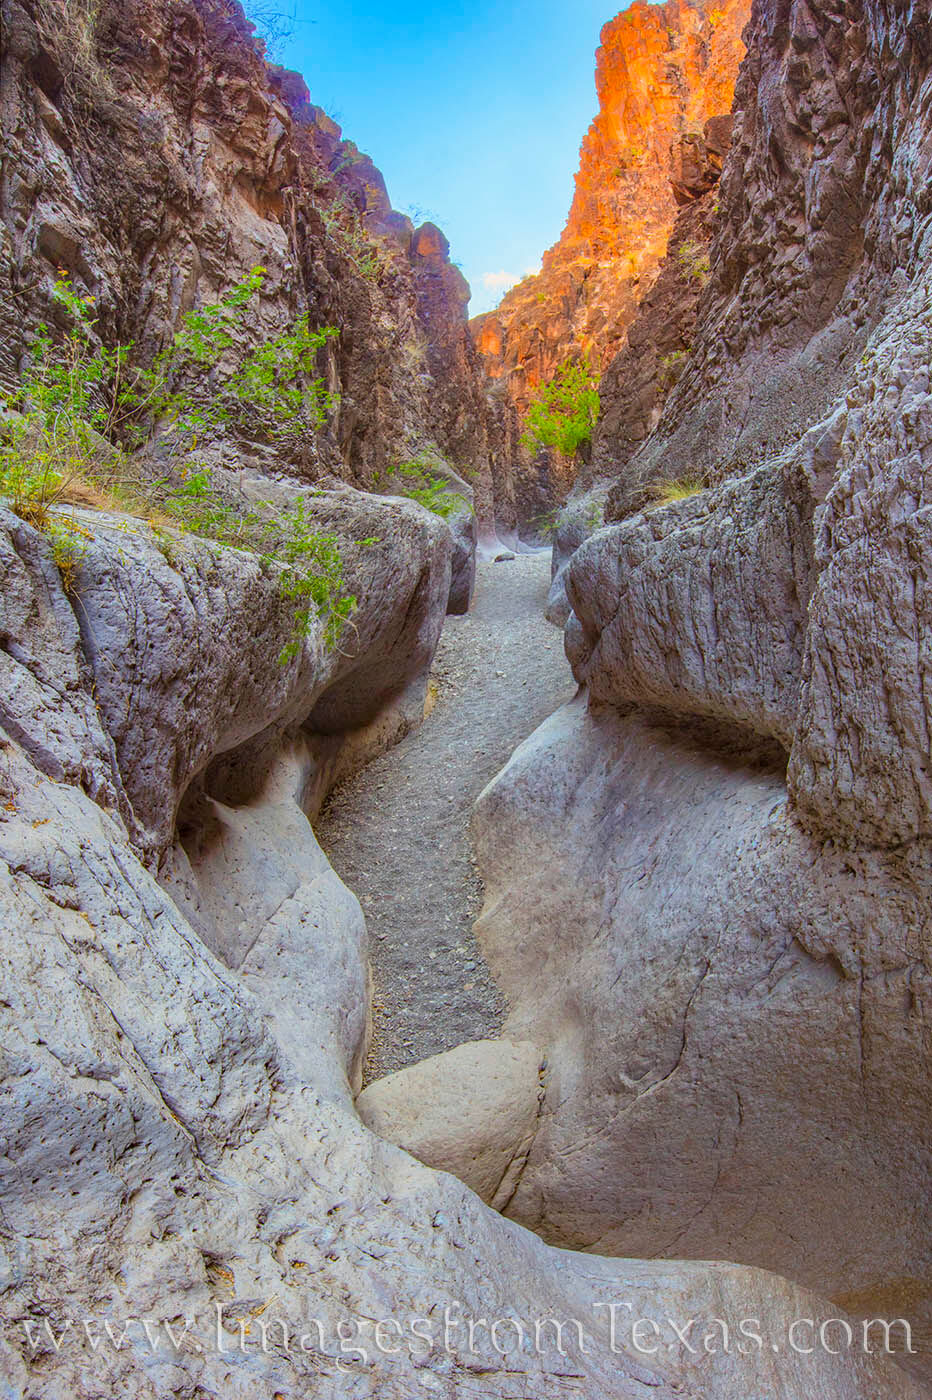 Closed Canyon is one of the most popular hikes in Big Bend Ranch State Park. With easy access just off FM 170, the 1.3 mile round...